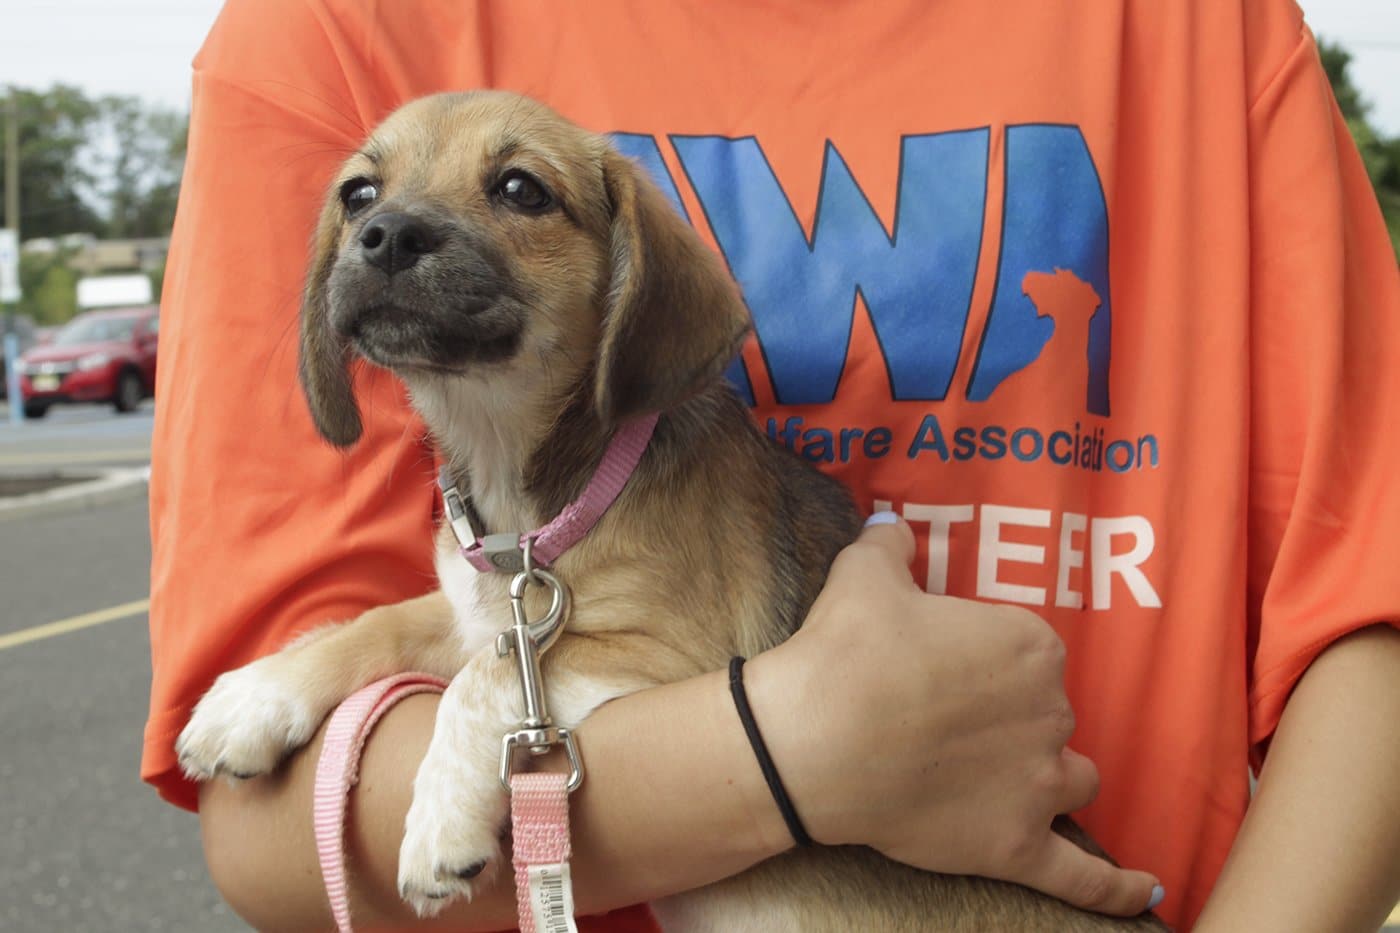 Brown puppy being held by person with orange Animal Welfare Association shirt.